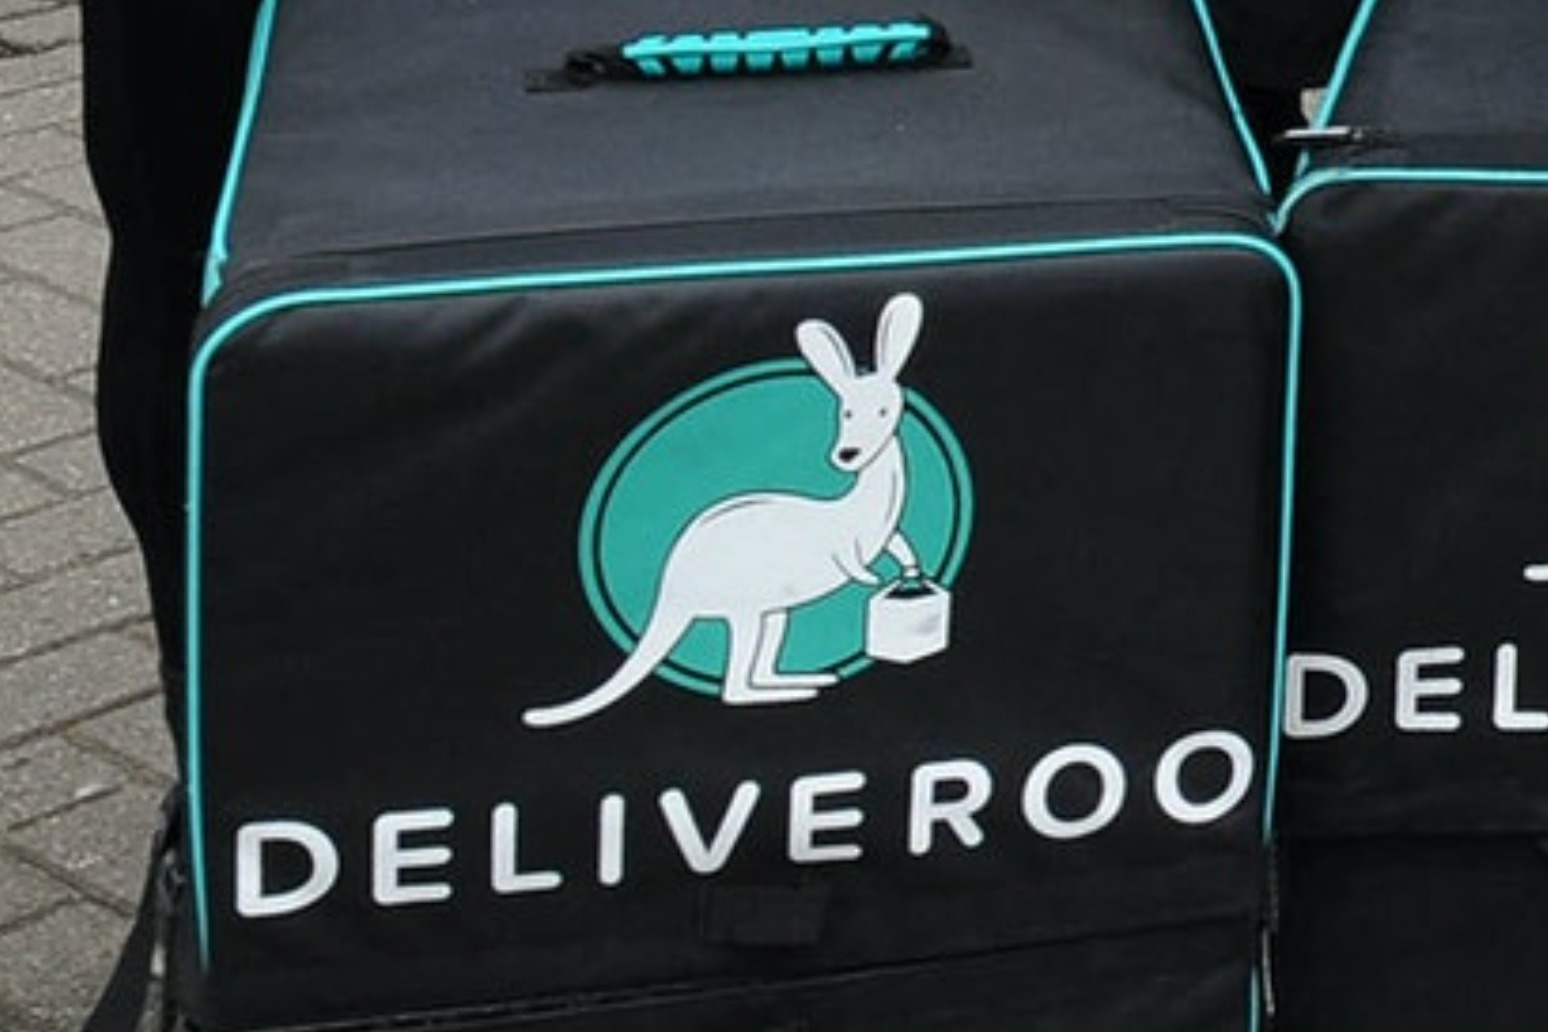 Deliveroo dishes up first ever gift card Banbury FM